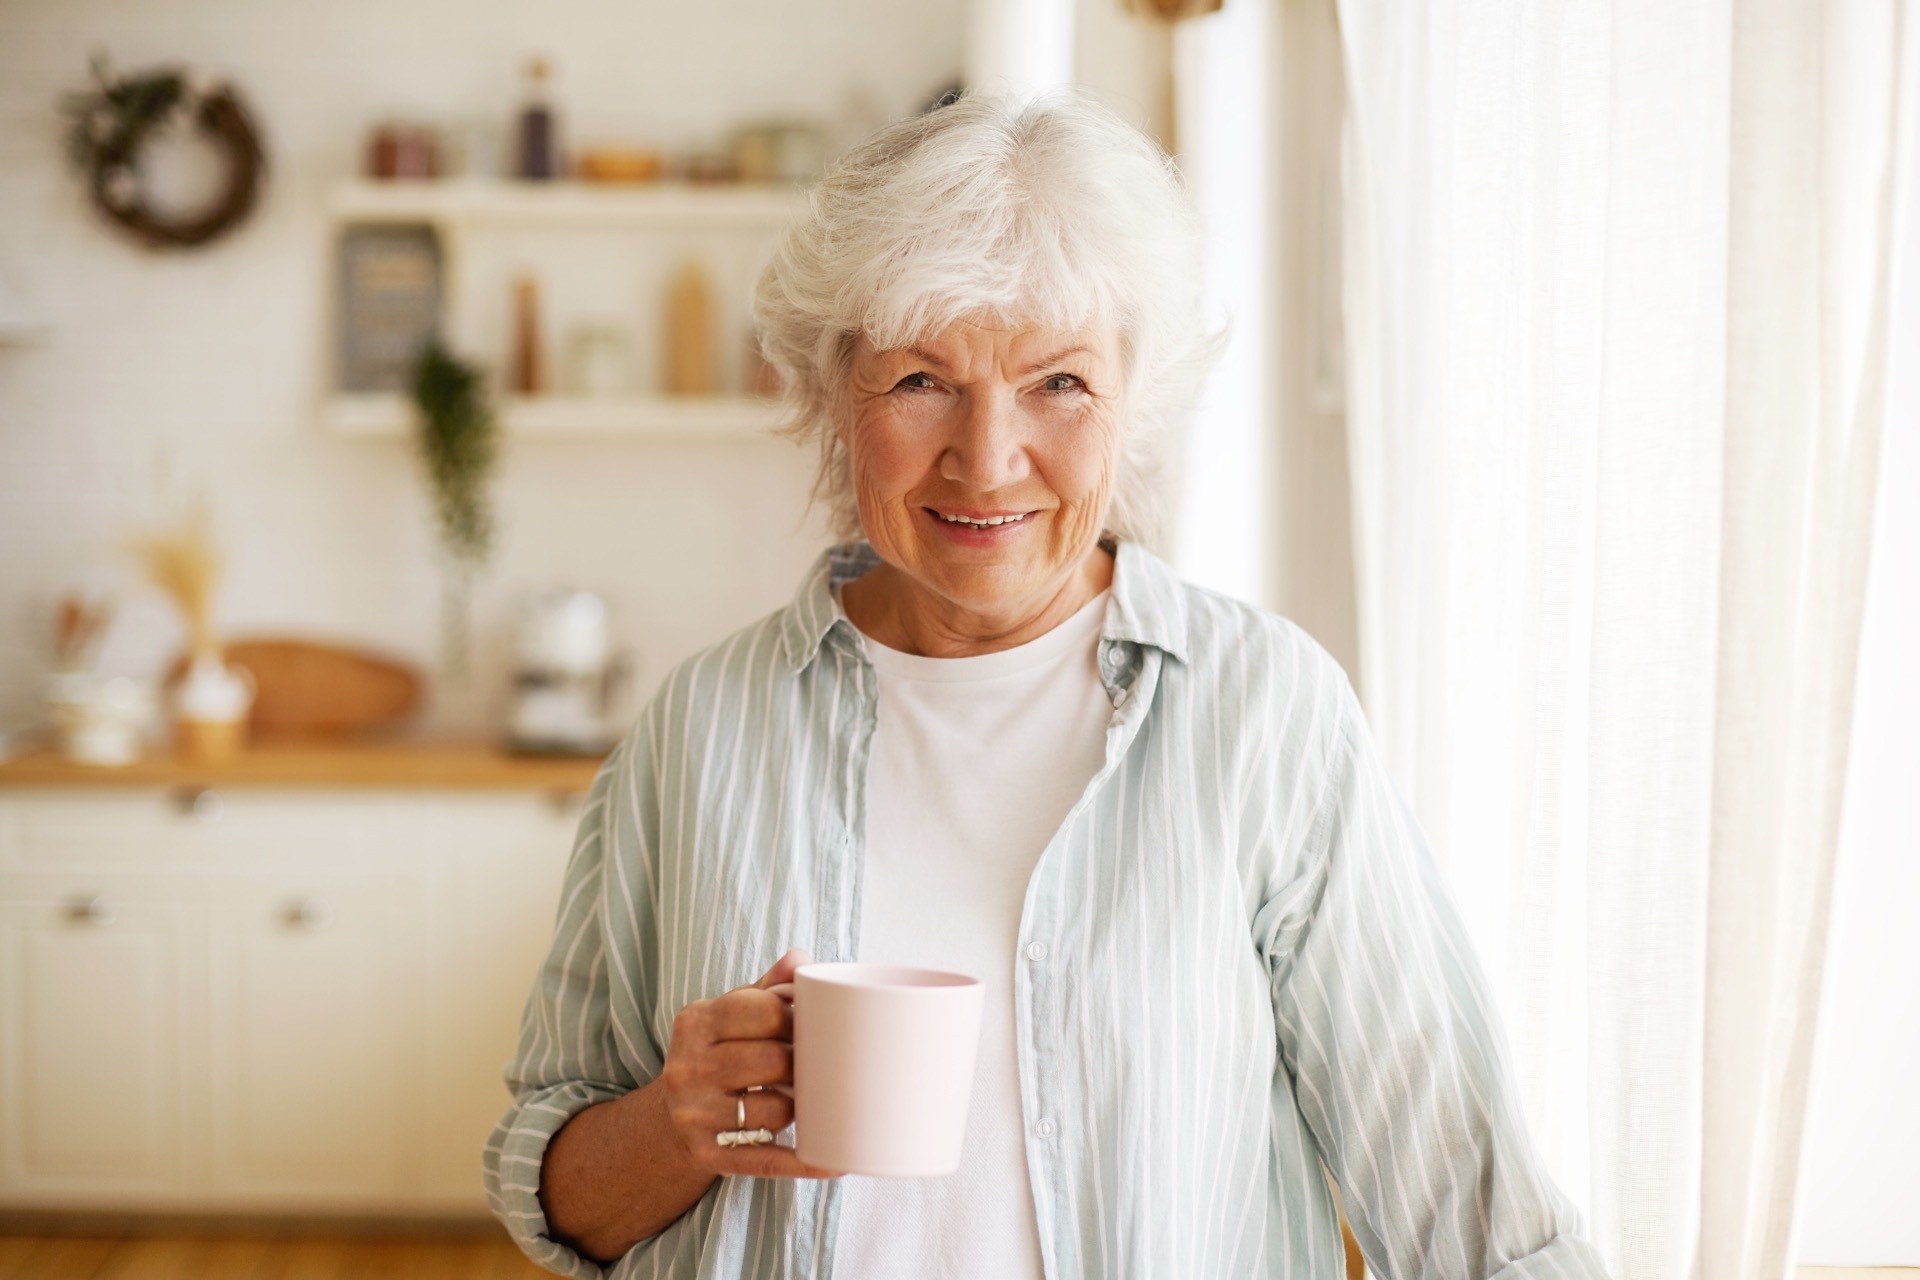 An older person, smiling, and holding a mug in their kitchen; our Wills Solicitors discuss Deputyship Applications and how we can help, which you can view by clicking this image.